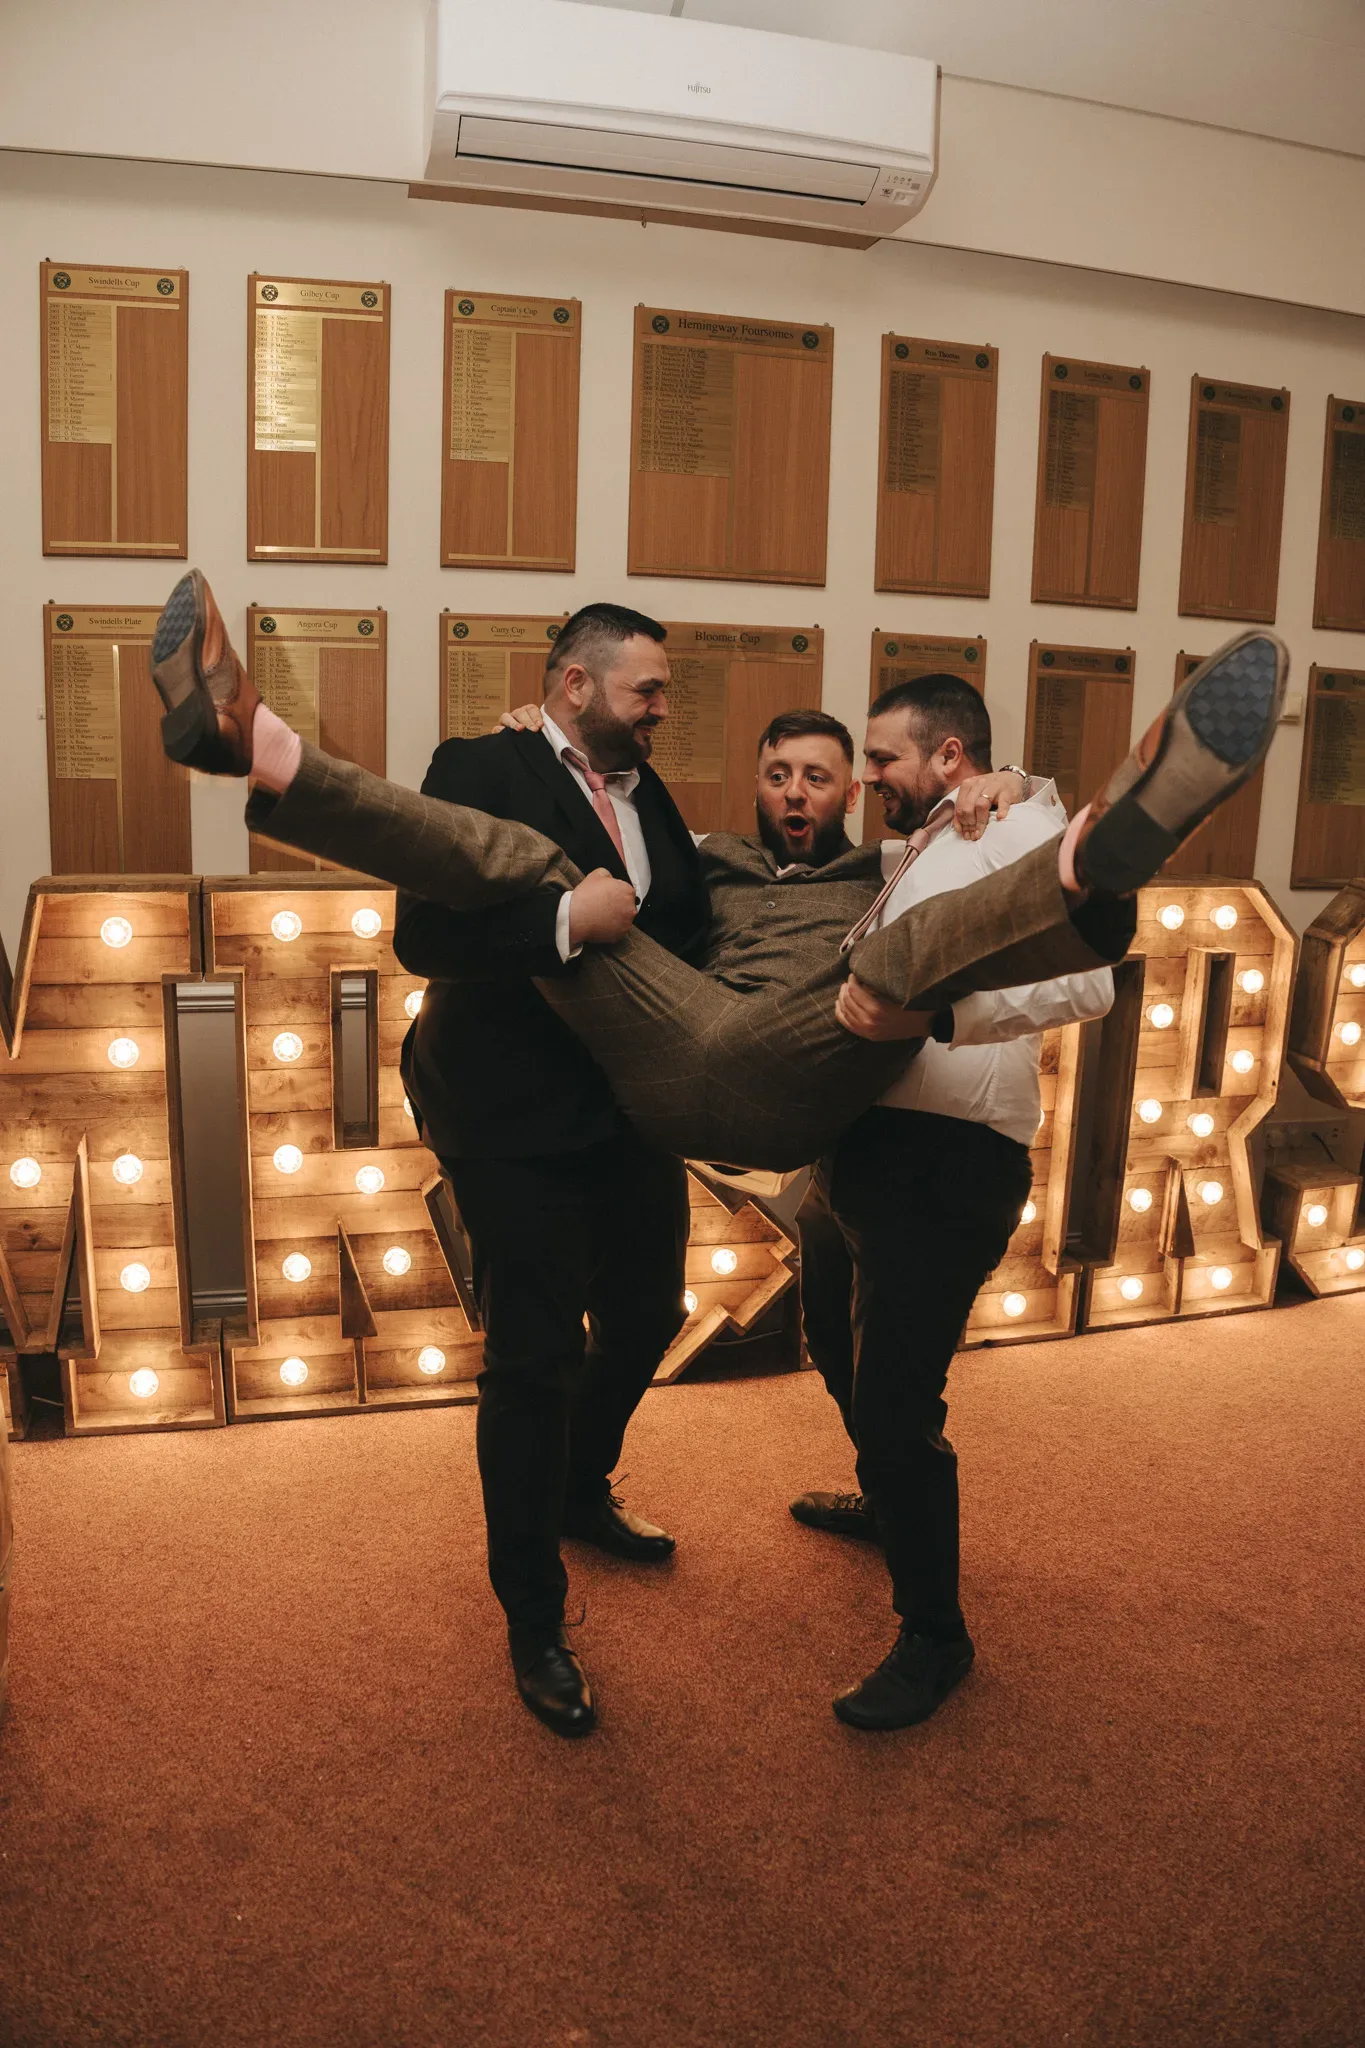 Three men in a celebratory setting, playfully lifting a fourth man horizontally across their arms. they are all dressed in formal attire, with large lit "bar" letters in the background, adding a festive ambiance.